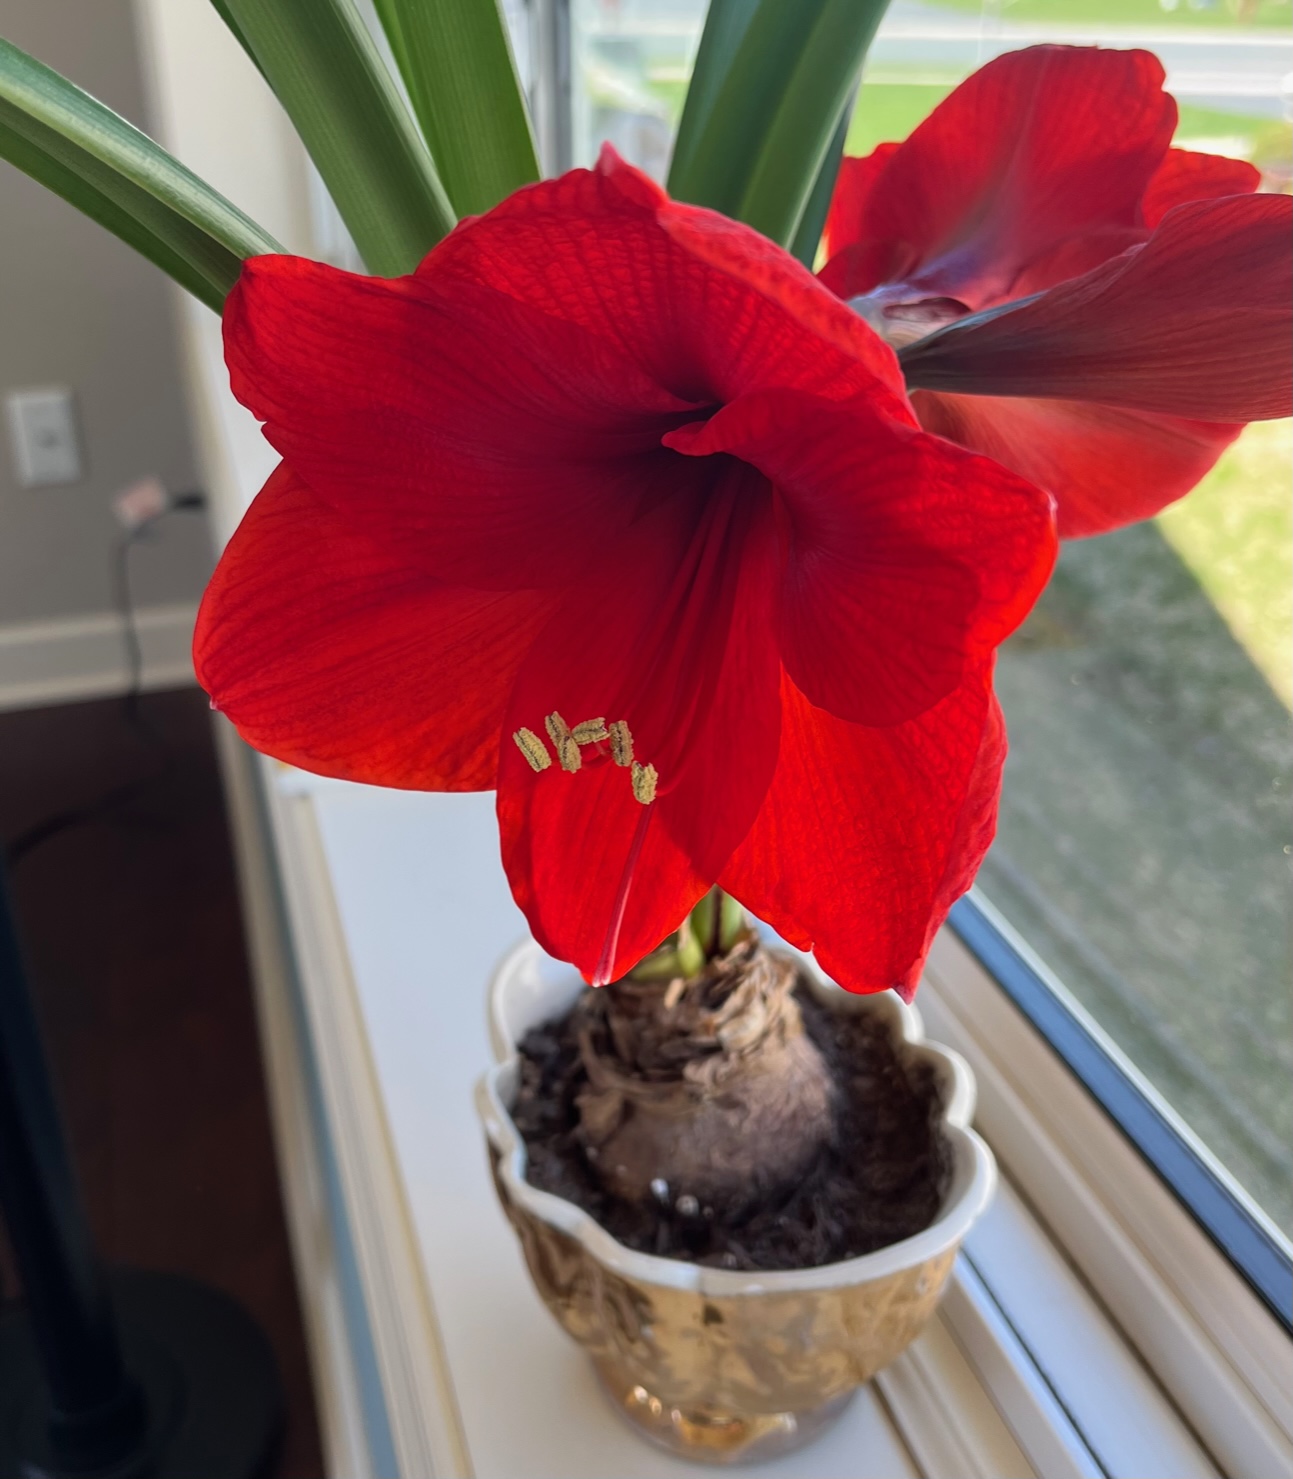 Amaryllis Blooms in - My Northern